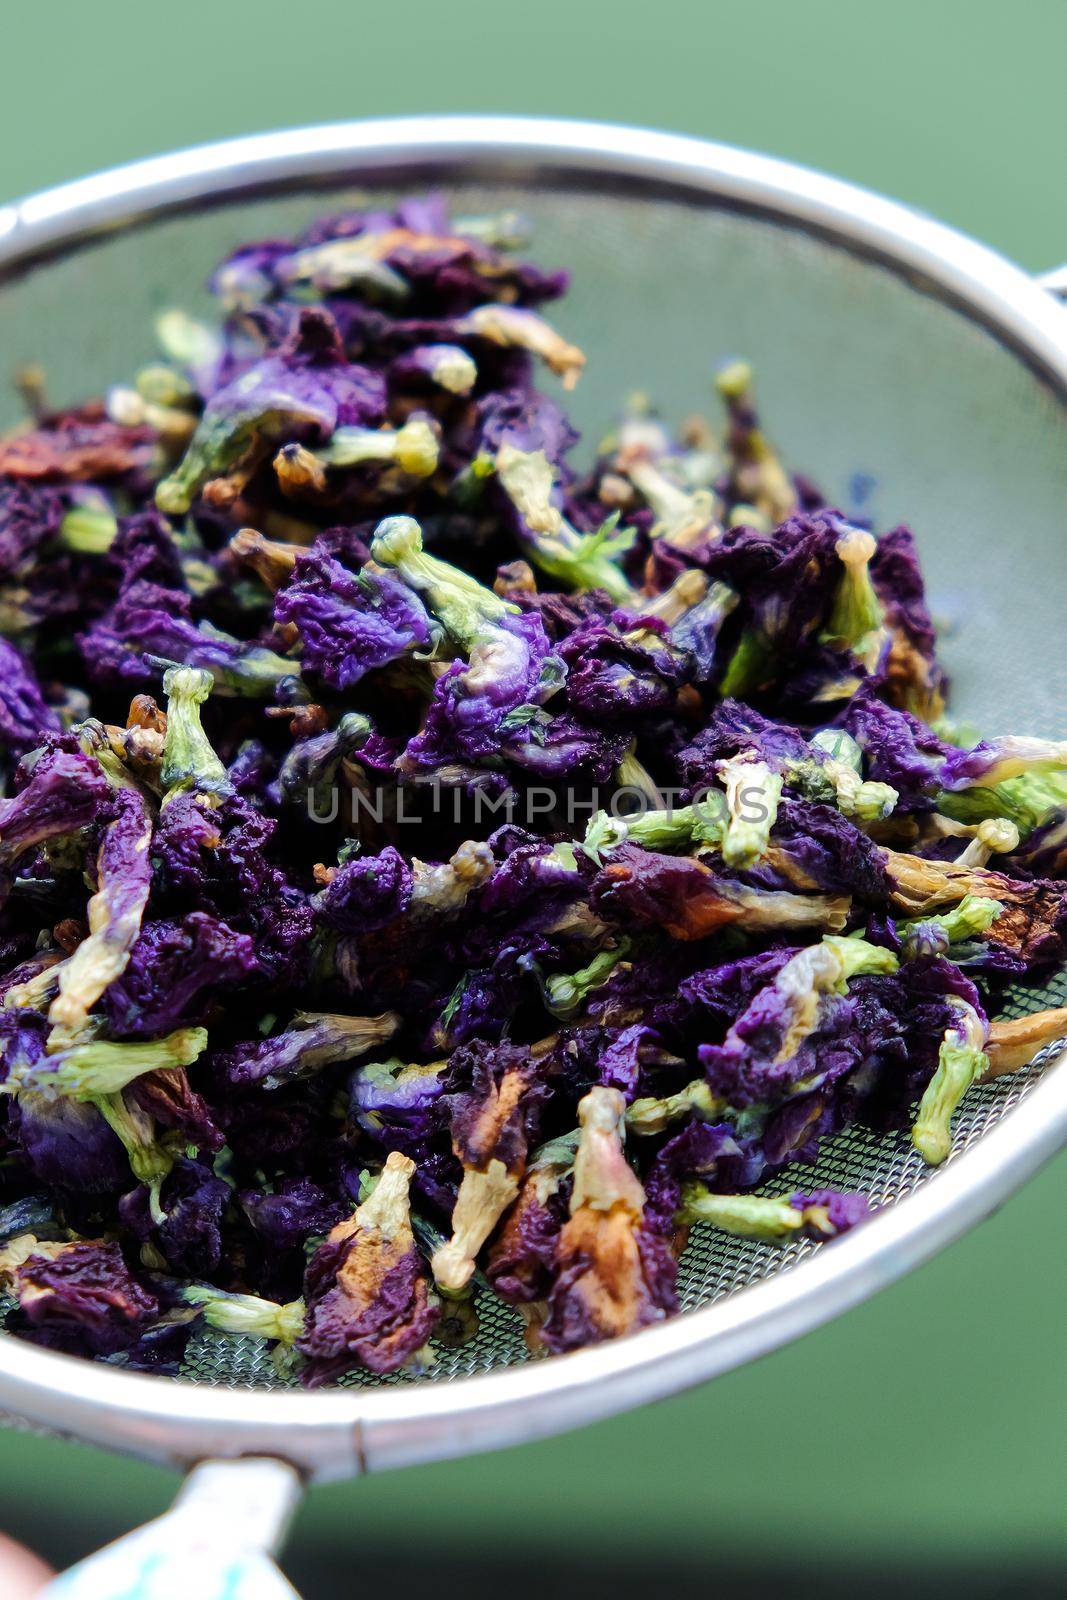 dried butterfly pea, The process of making Butterfly Pea Juice by the traditional Thai method.